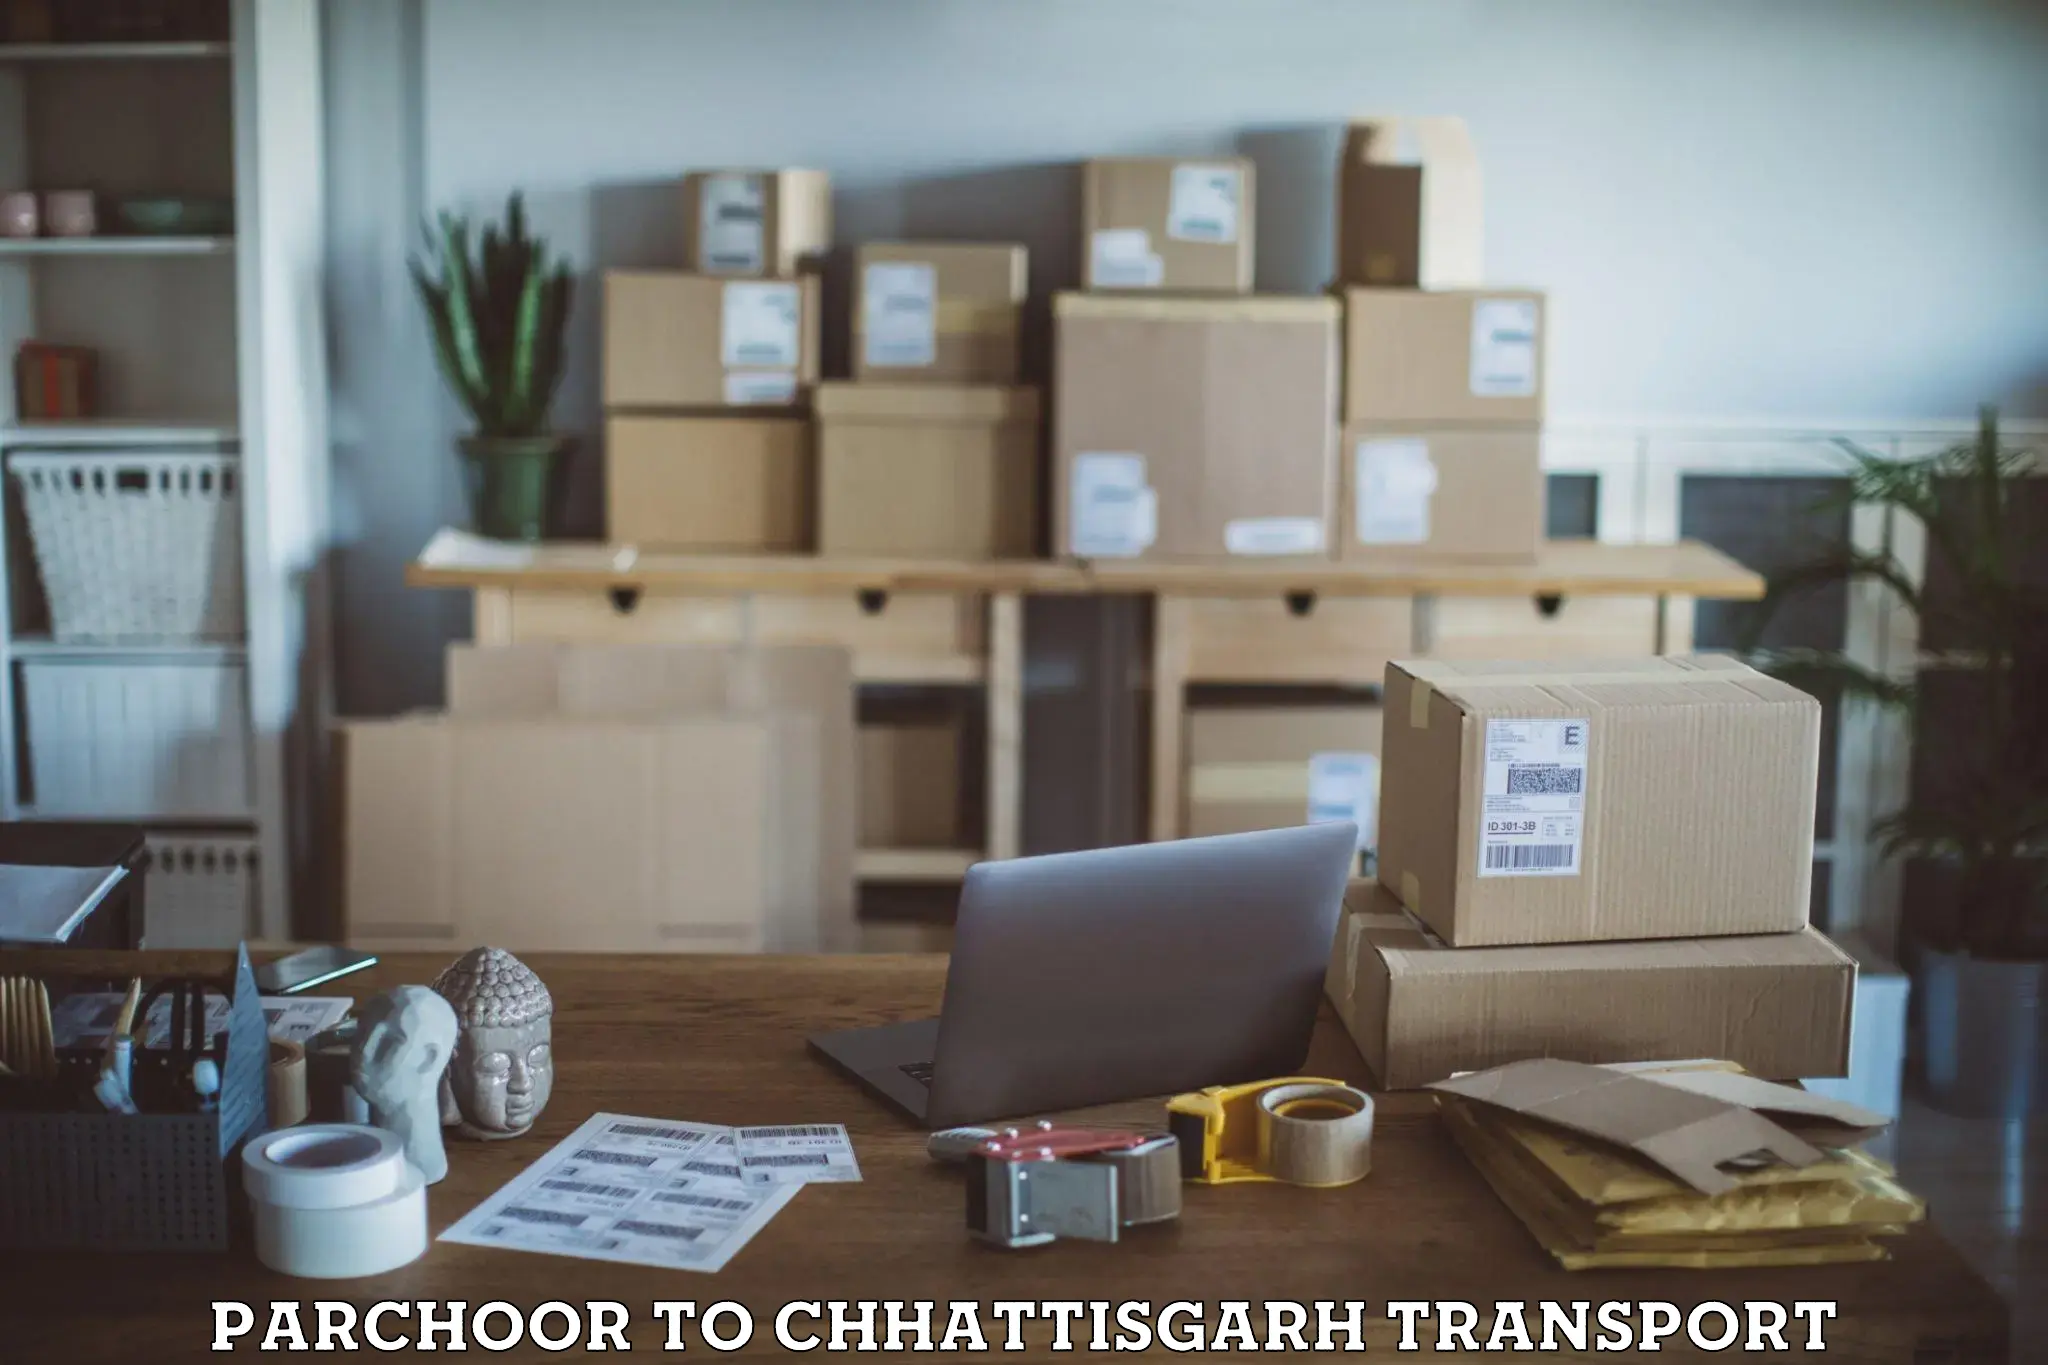 Bike shipping service Parchoor to Raipur